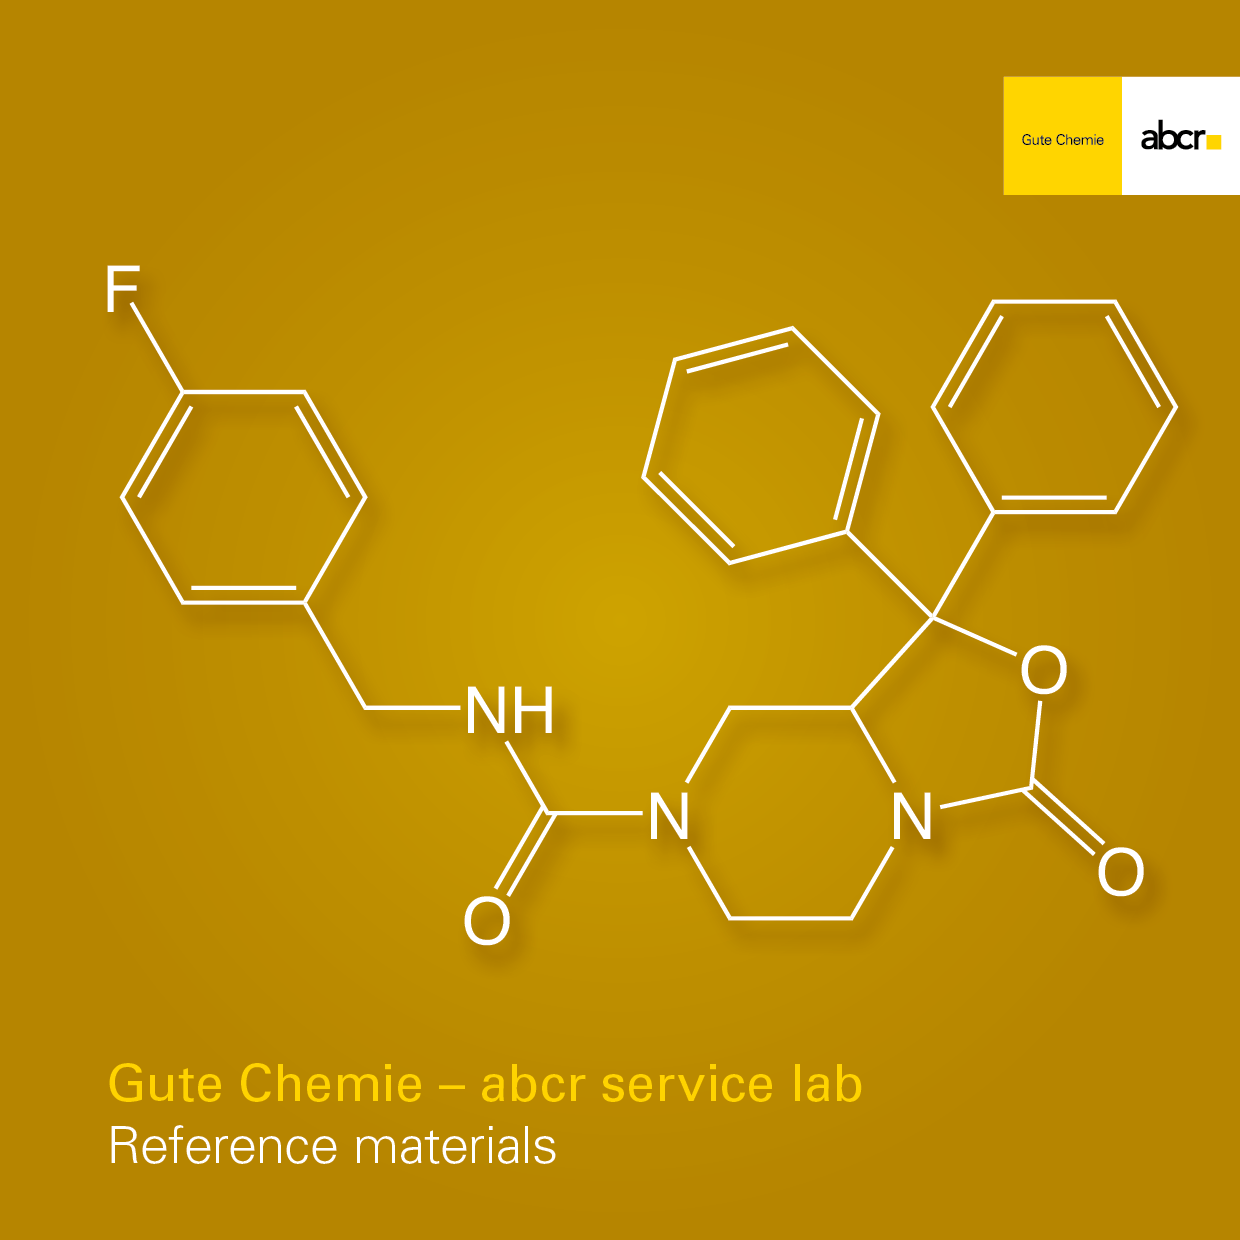 Reference materials - abcr service lab